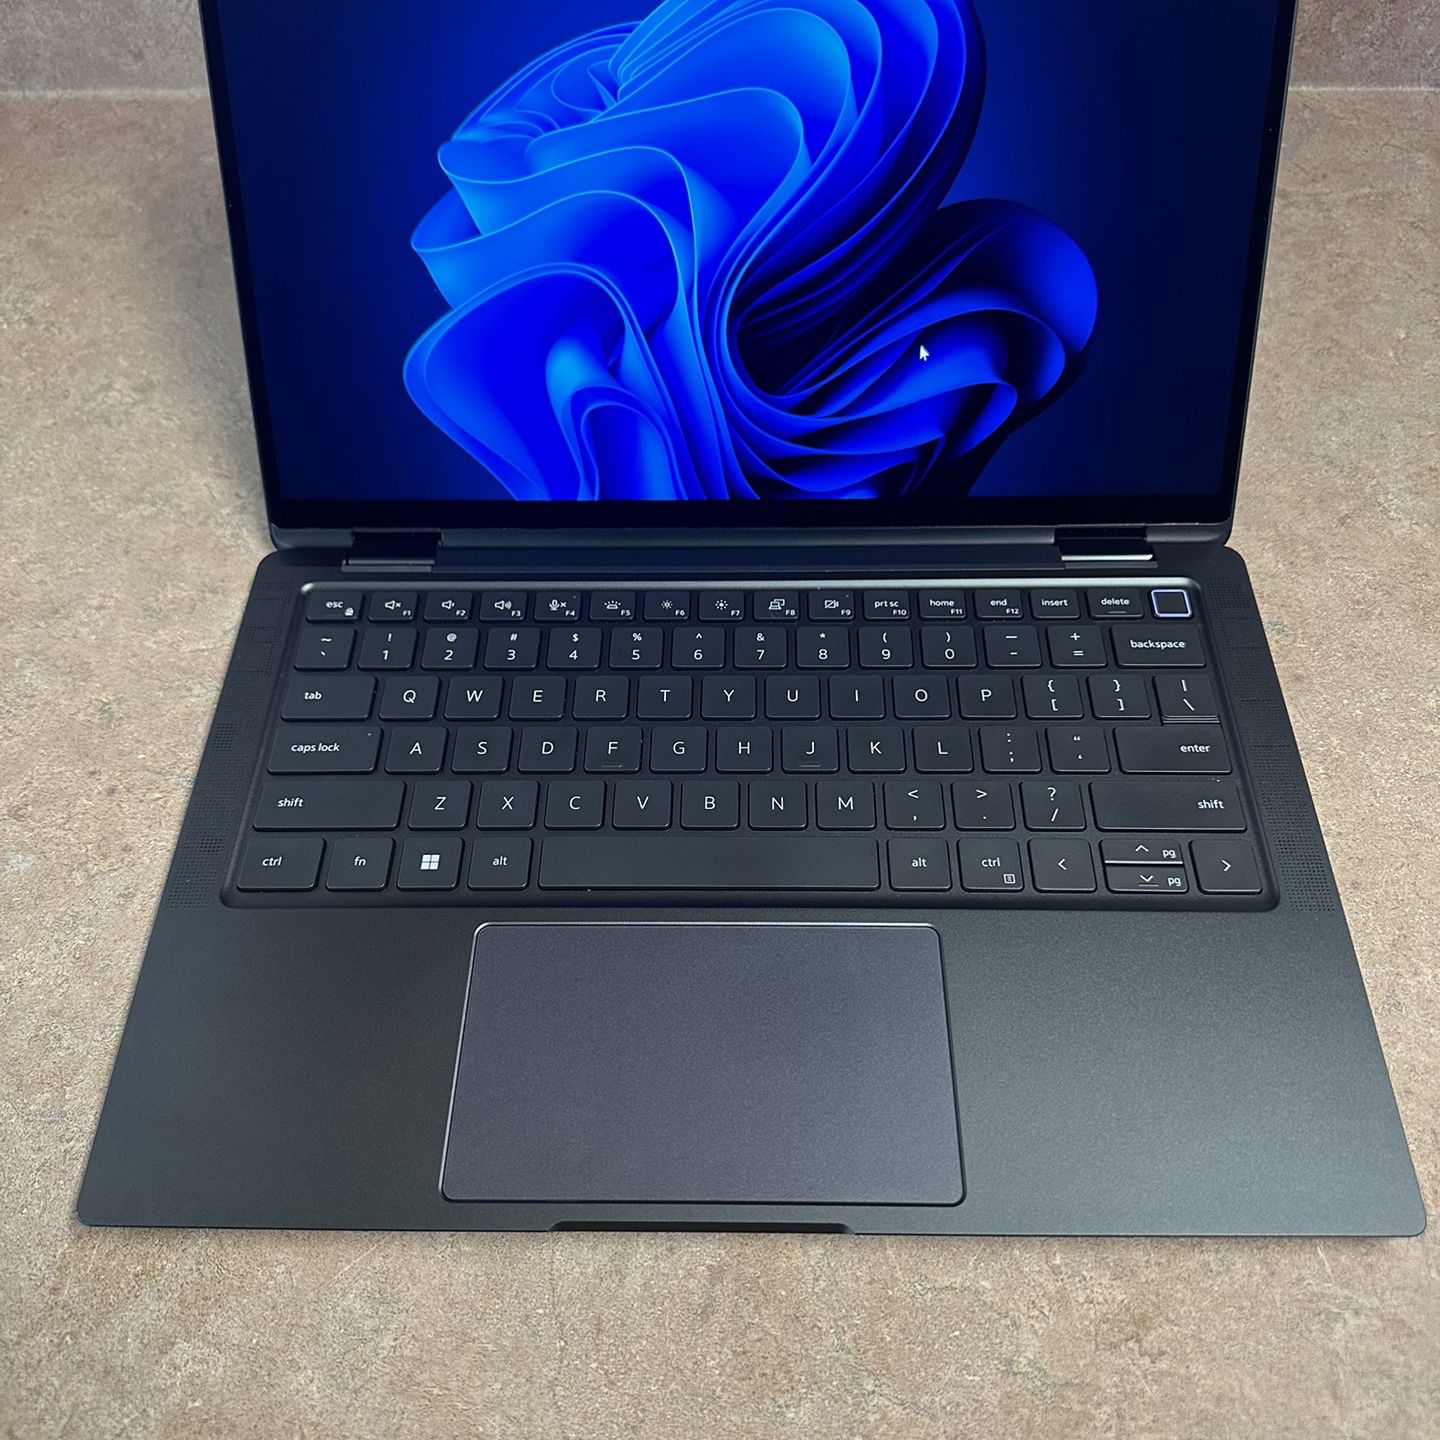 Dell 13" New Laptop 12th Gen Intel i7, with 32Gigs of DDR5 Ram. Wi-Fi 6 and a 5G Cellular